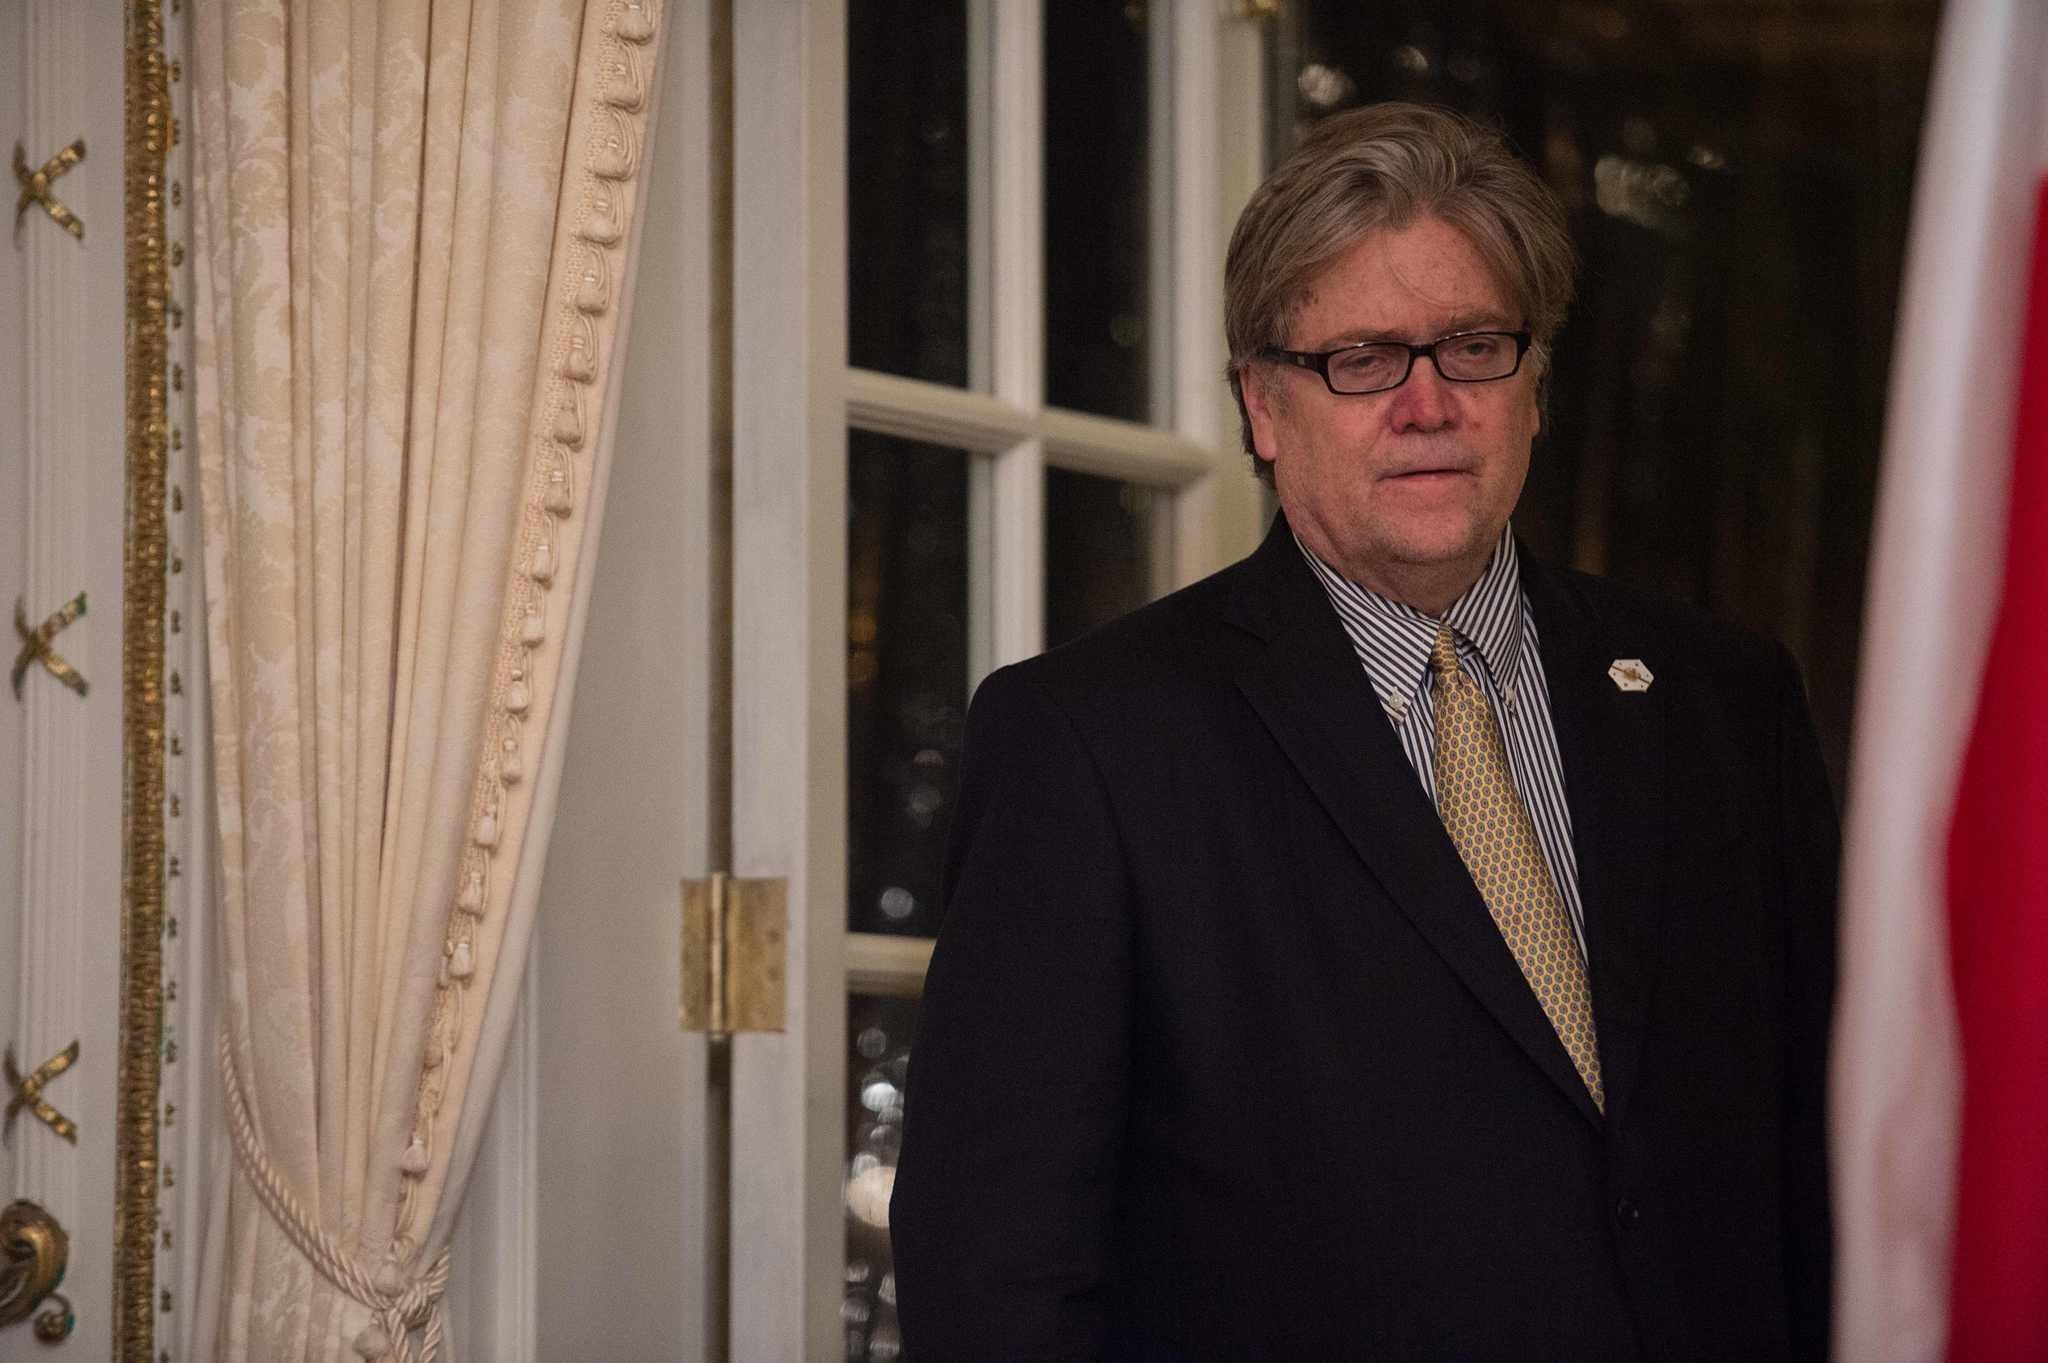 Steve Bannon, then US President Donald Trump's chief strategist, standing aside at Trump's Mar-a-Lago resort in Palm Beach, Florida. (AFP Photo)